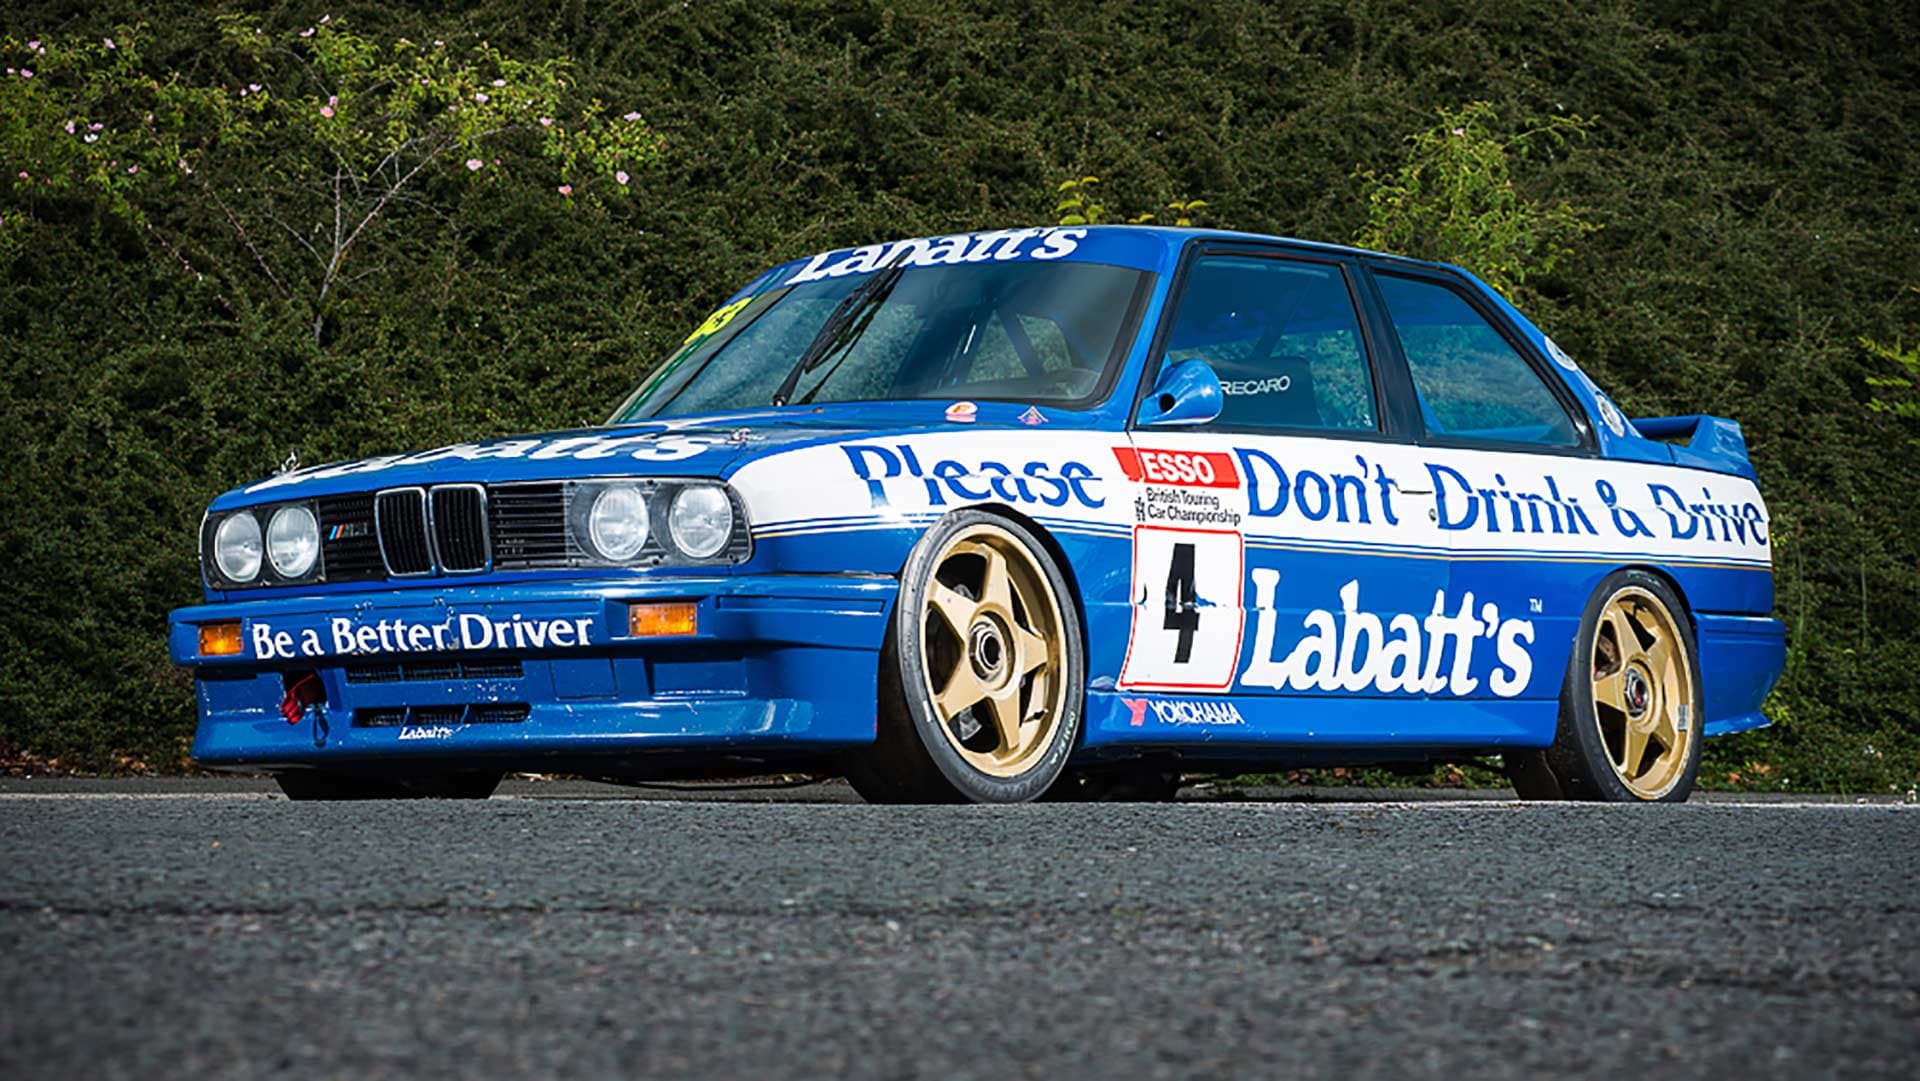 1991 BMW E30 M3 Race Car Could Sell for More Than $200,000 at Auction